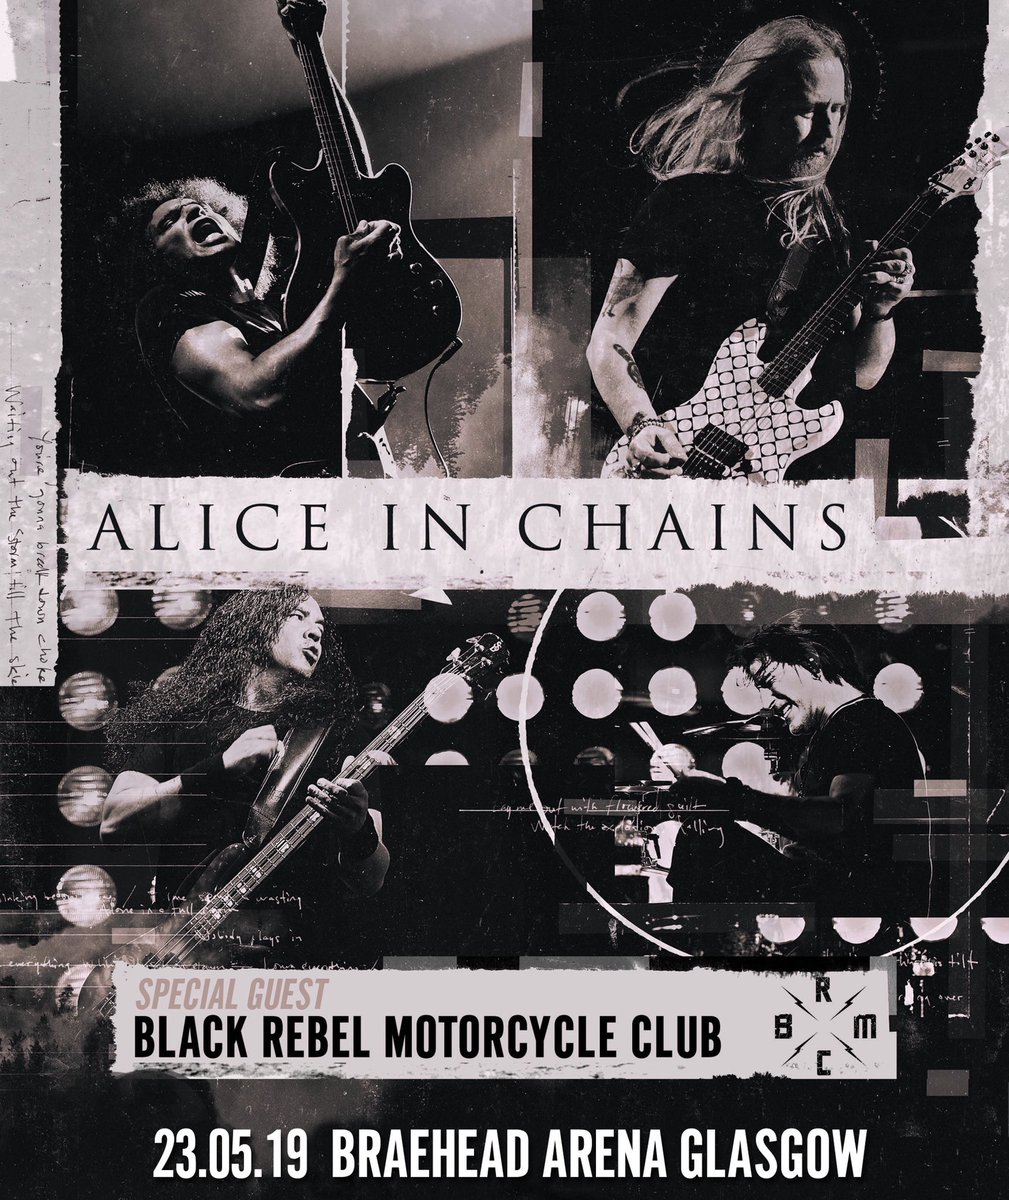 Tonight we have US rock legends @AliceInChains at @intuBraehead Arena Glasgow. Support comes from San Fransisco rock trio @BRMCofficial. Doors 6pm, tickets available at the box office. #aliceinchains #blackrebelmotorcycleclub #triplegmusic